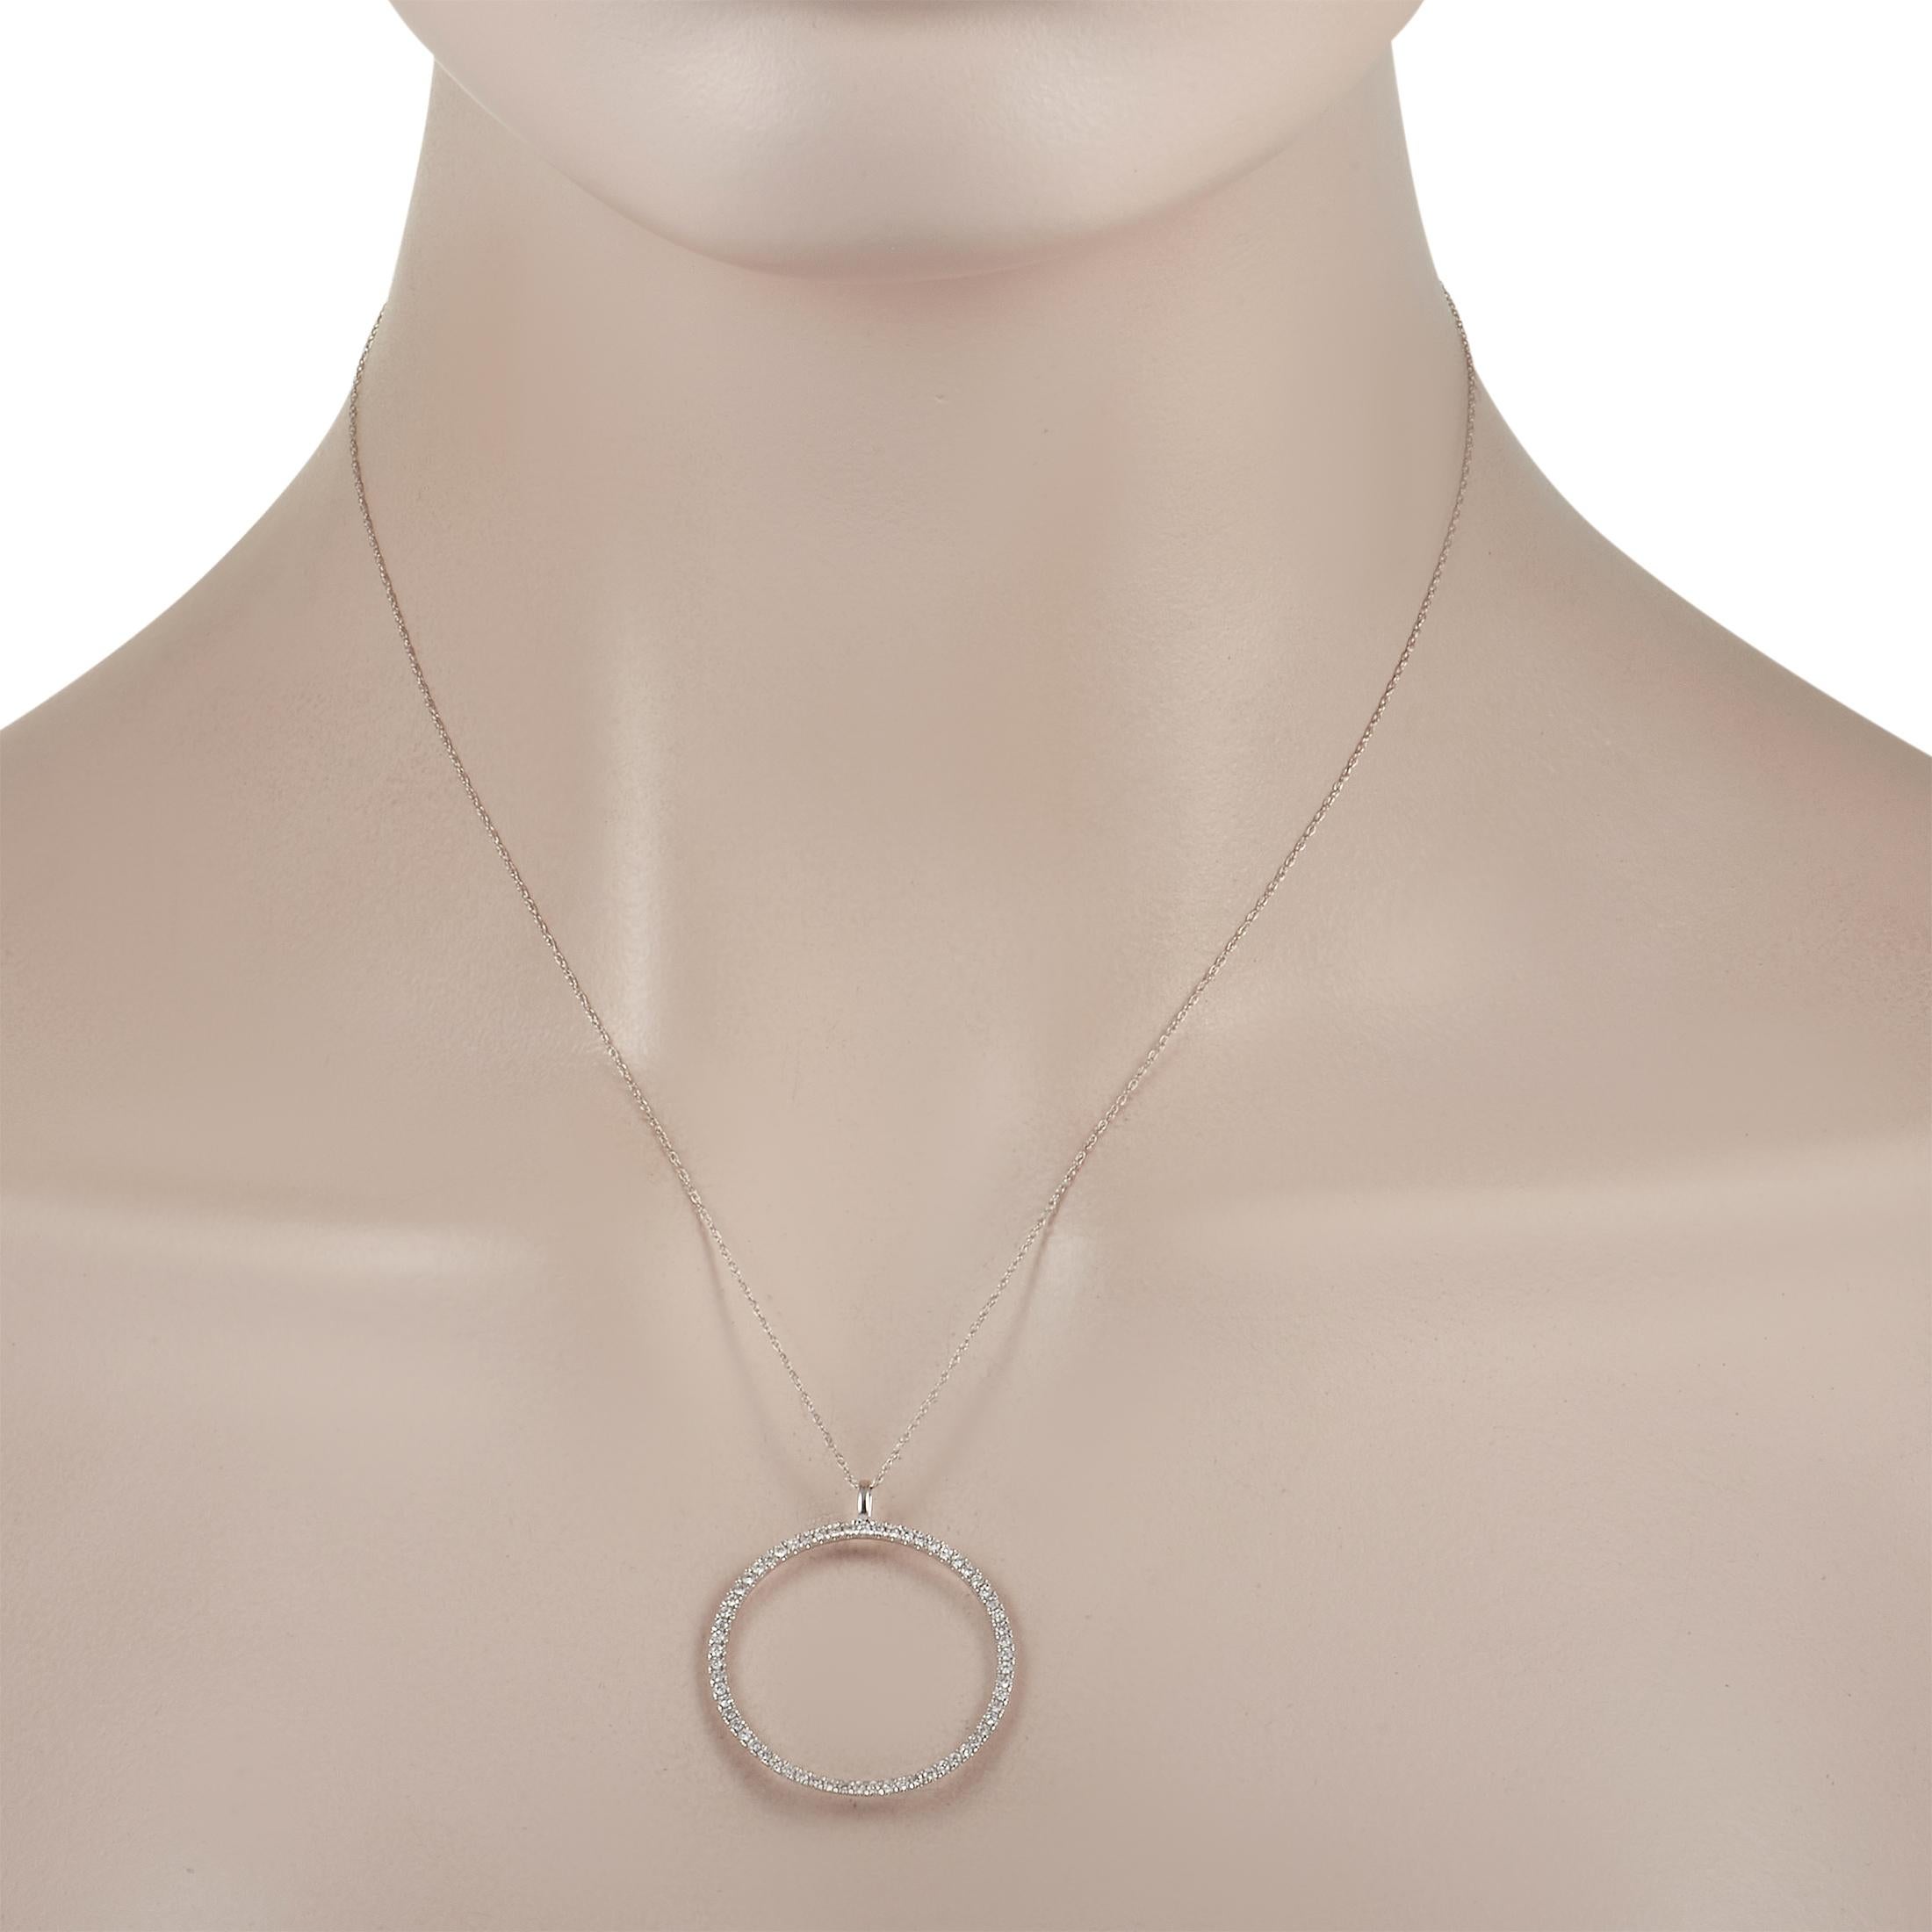 This elegant 14K White Gold necklace is sleek, simple piece with an obvious sense of sophistication. The stylish circular pendant measures 1.25” long, 1.15” wide, and comes suspended from an 18” chain. It’s also completely covered in diamonds, which